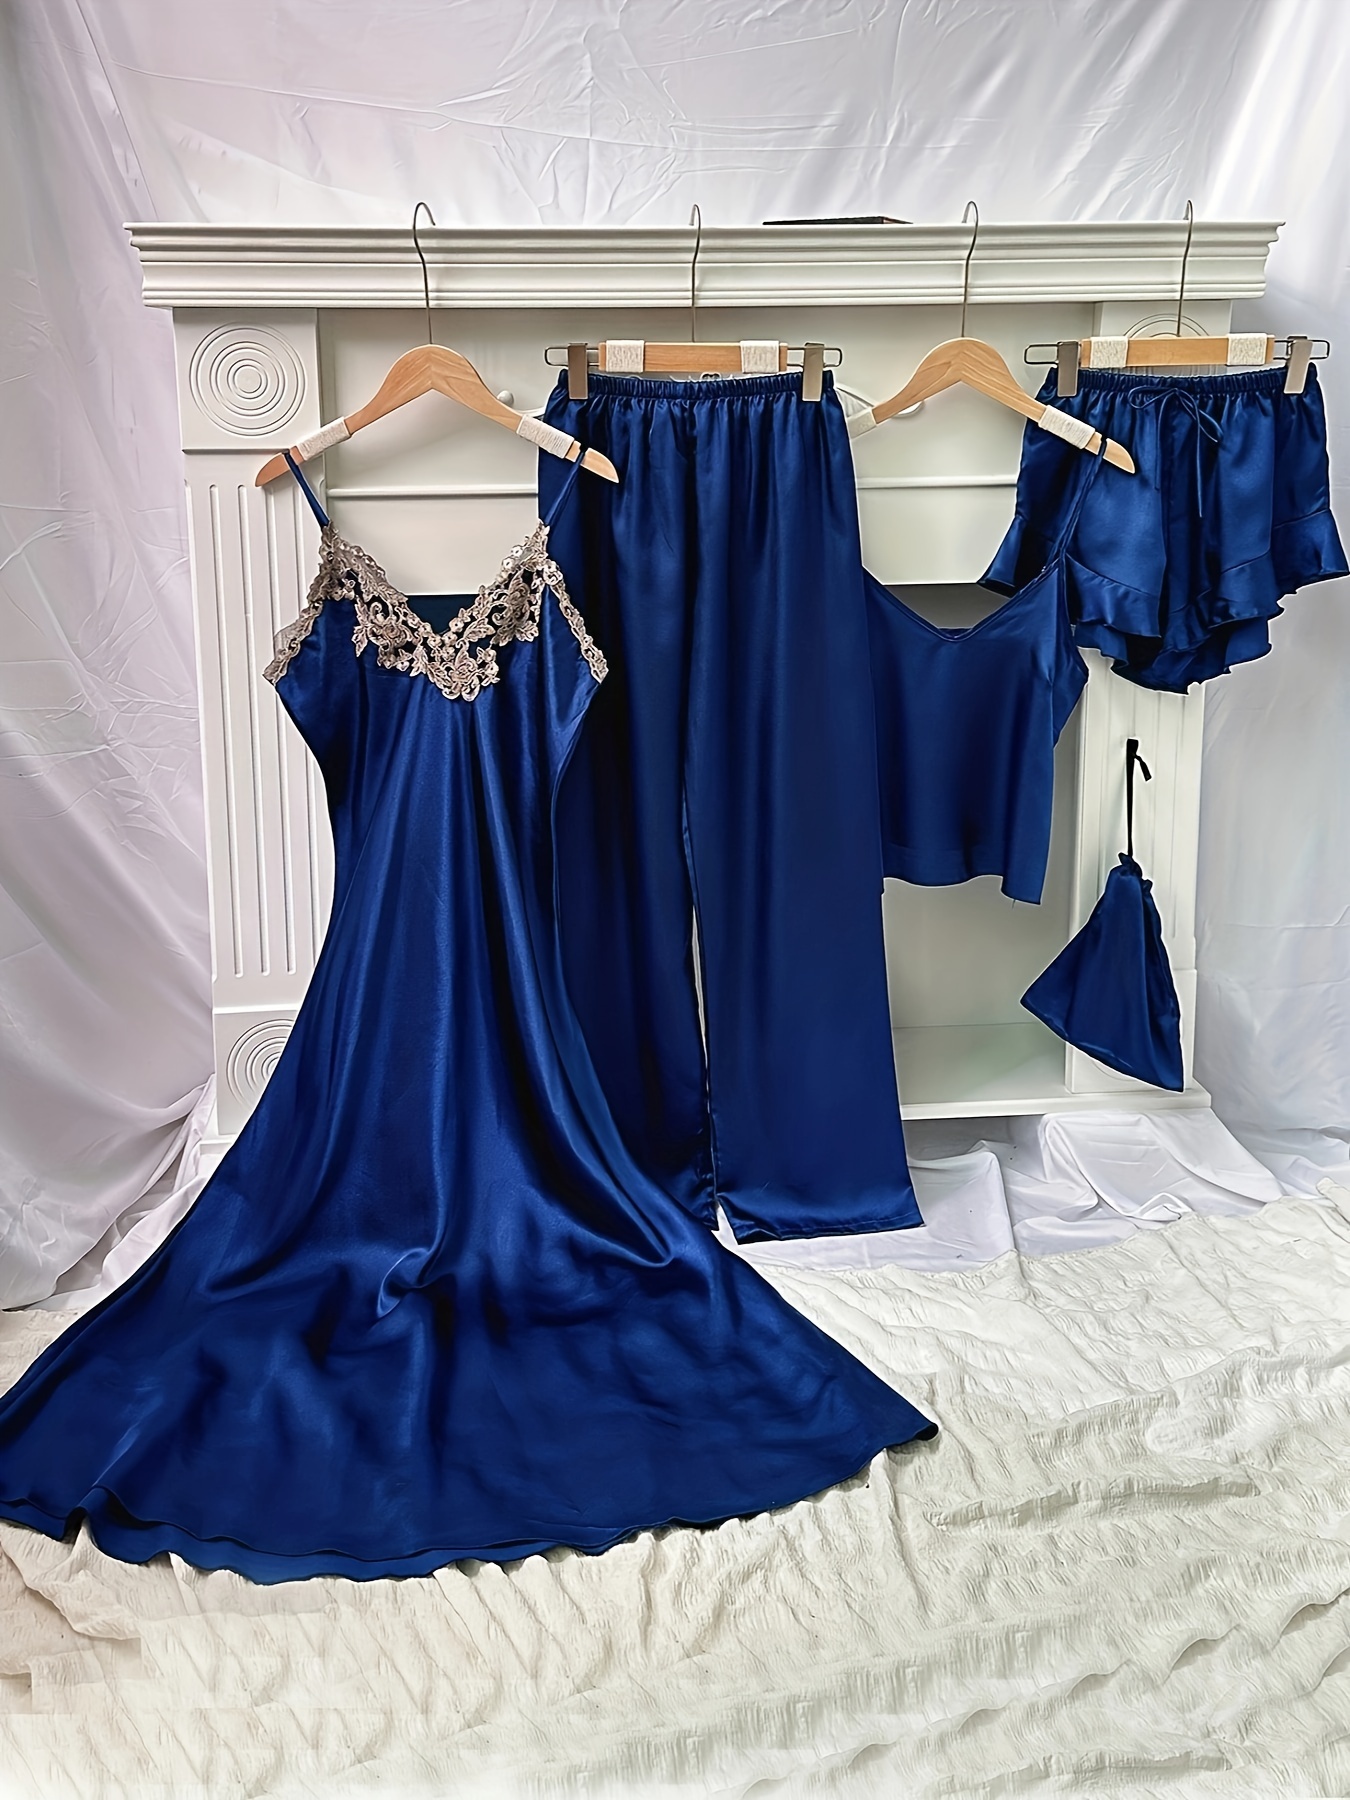 Elegant Satin Contrast Lace Pajama Set With White Satin Camisole Nightwear  And Soft Loungewear X0526 From Musuo03, $15.67